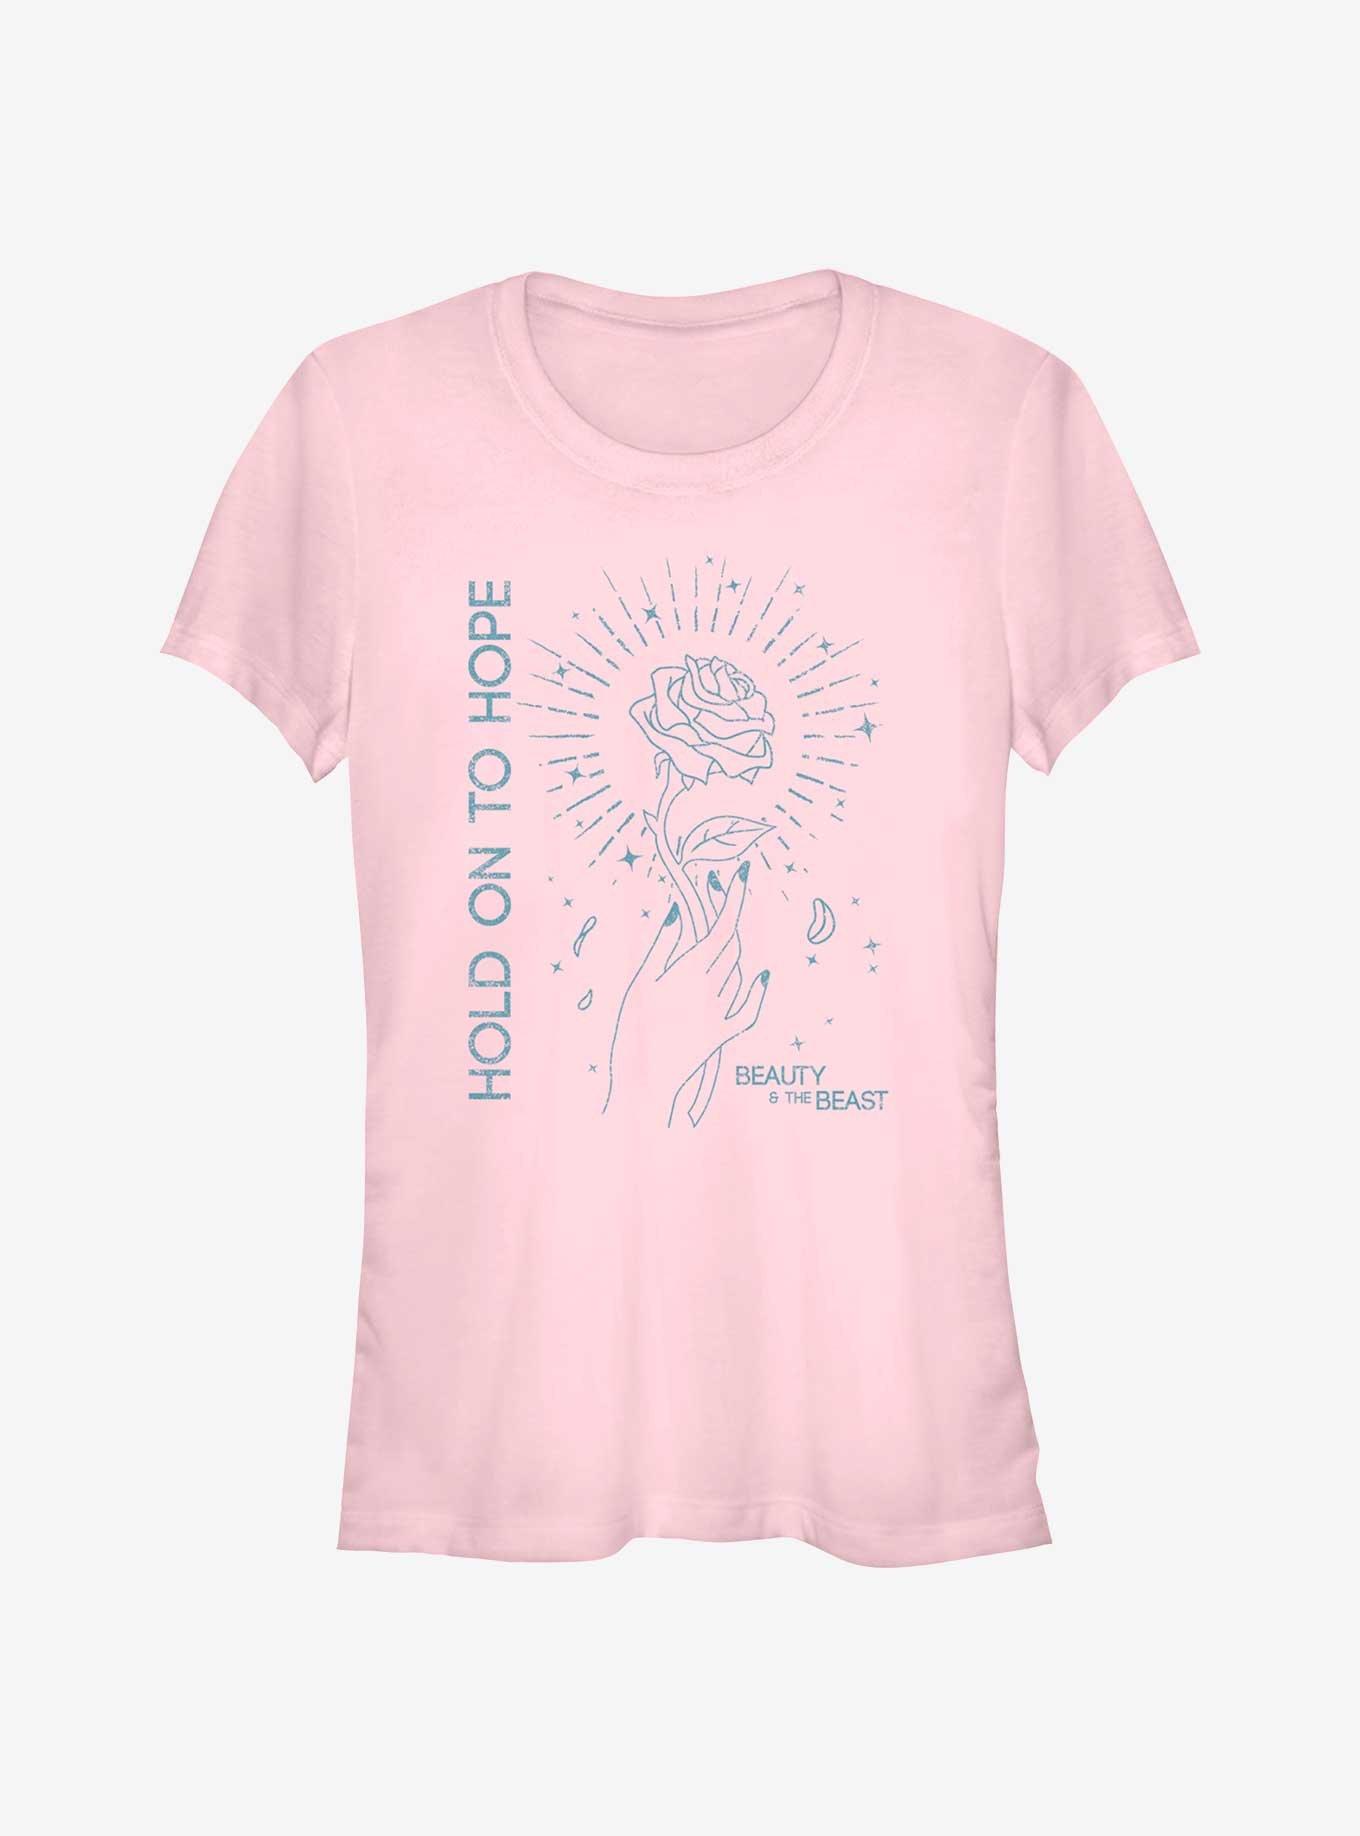 Disney Beauty And The Beast Hold On To Hope Girls T-Shirt, LIGHT PINK, hi-res